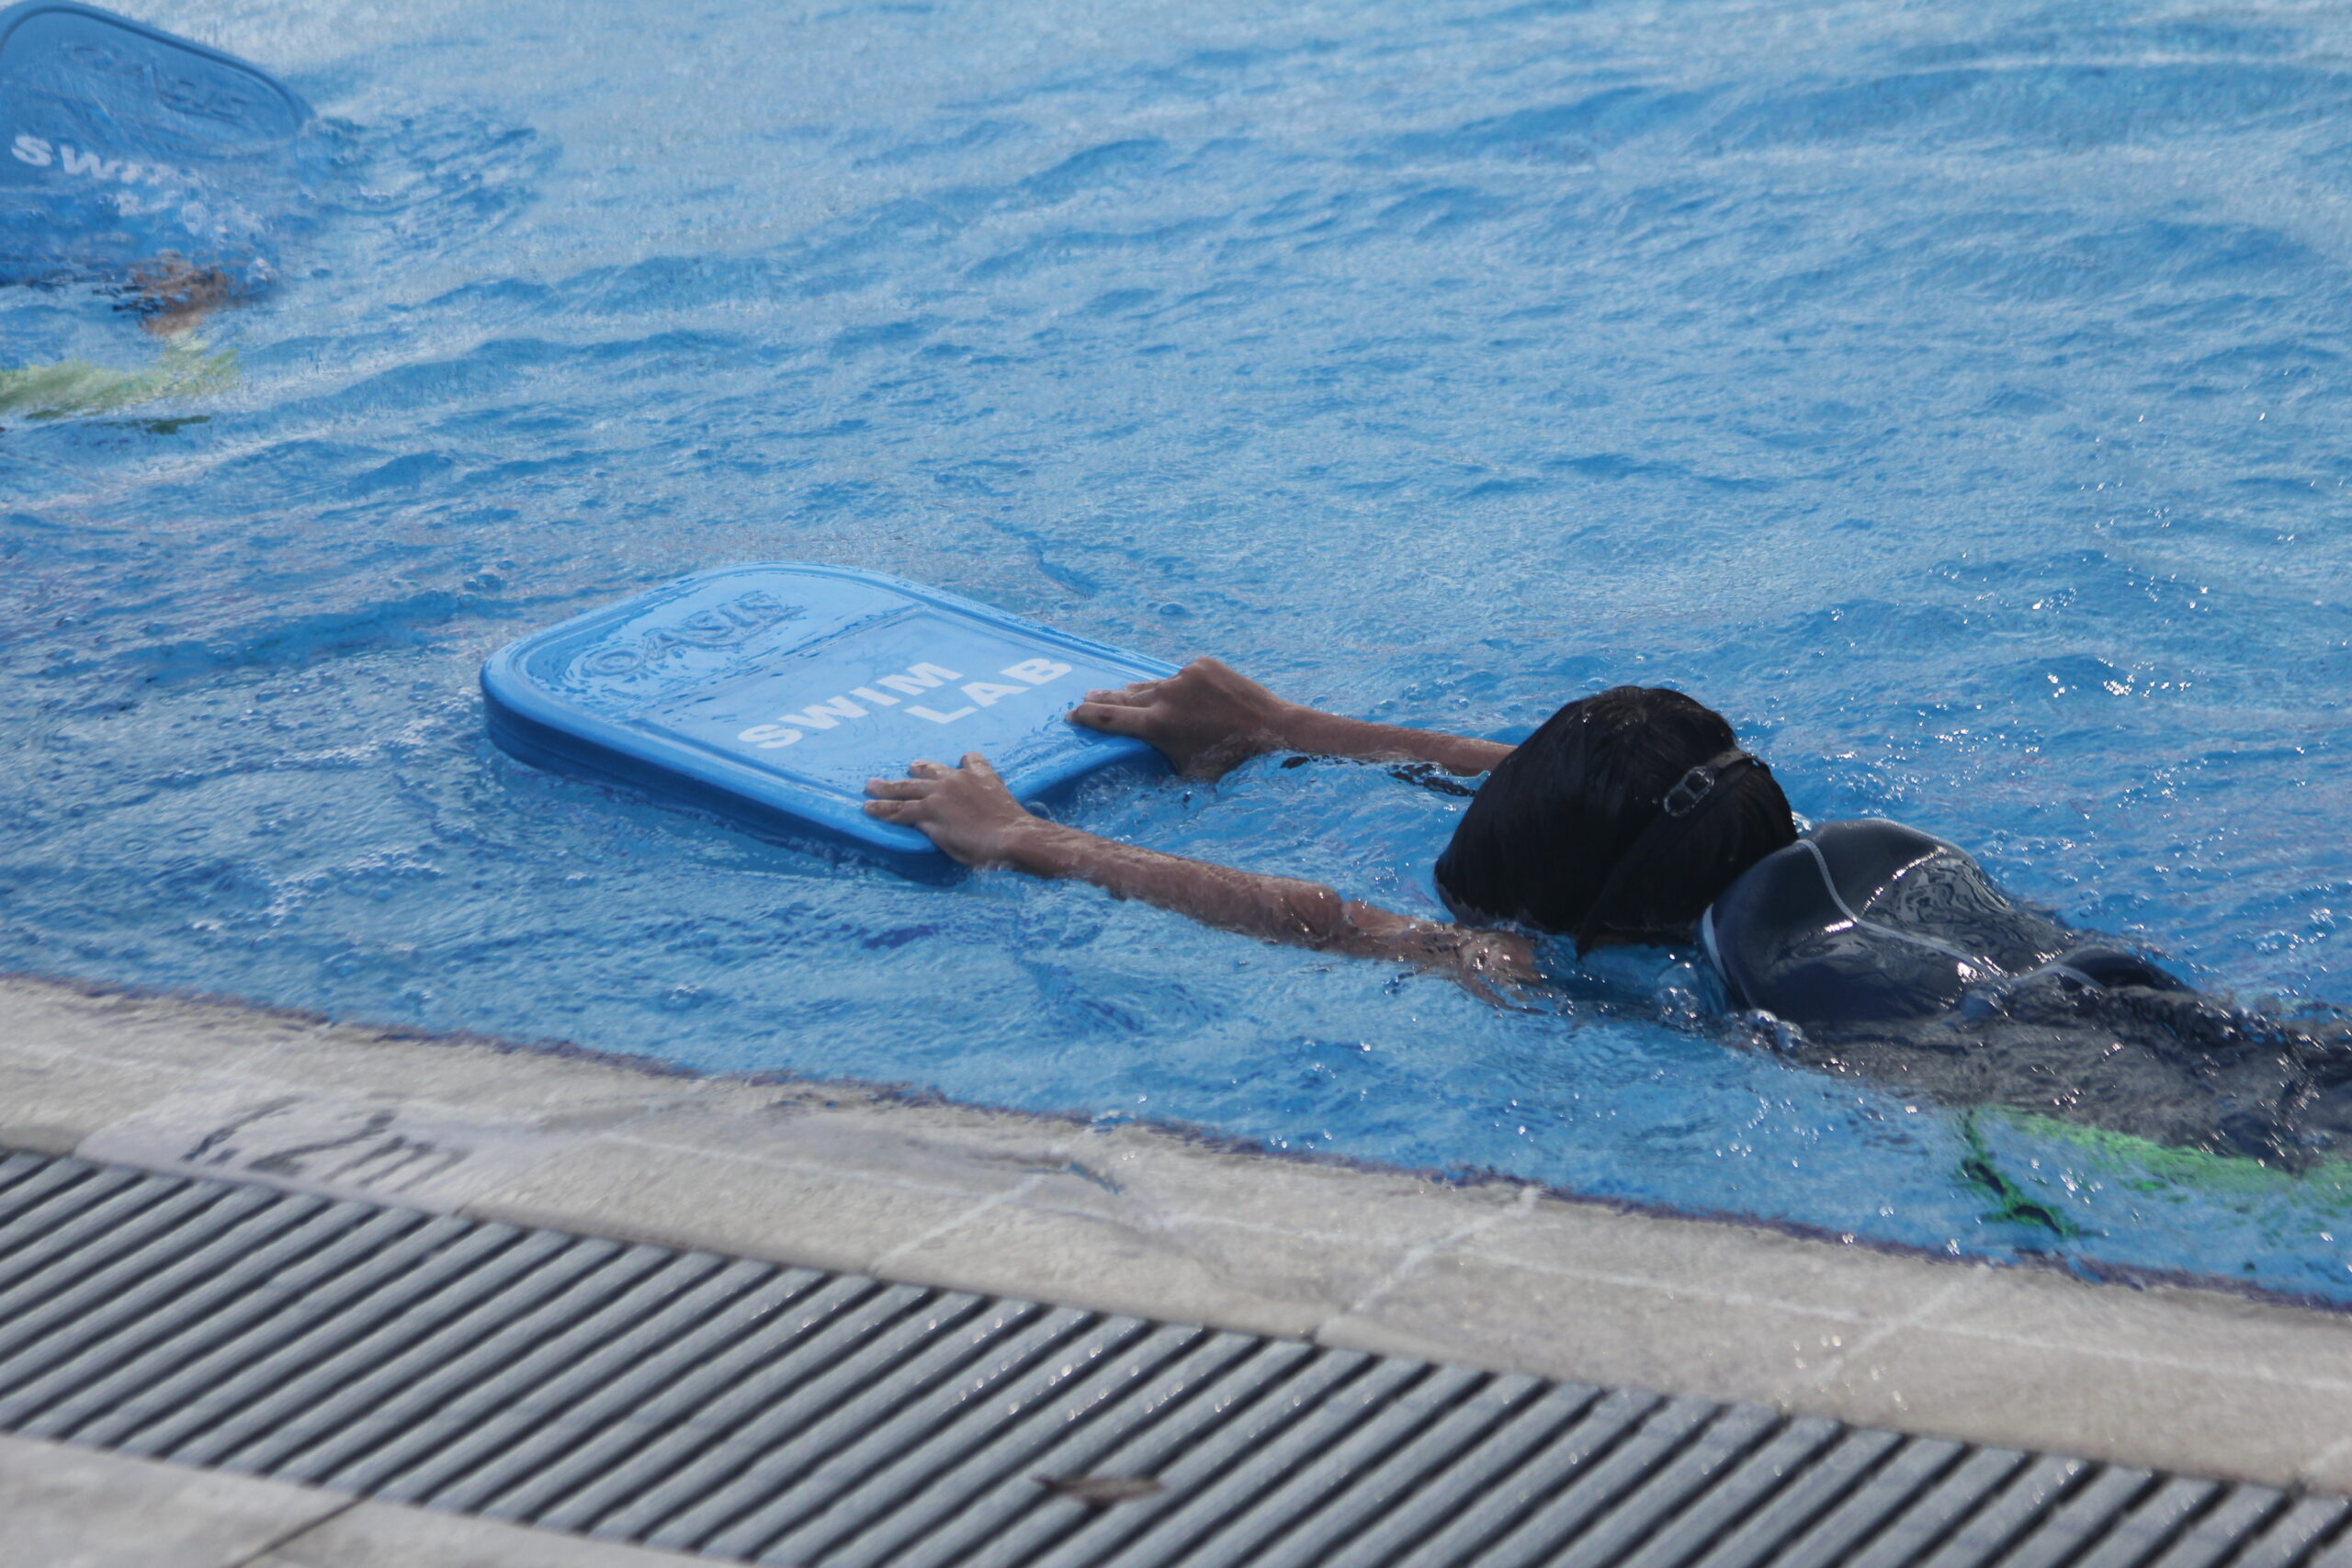 A child confidently swimming in The Swim Lab's pool using a float board with the 'Swim Lab' logo on it.